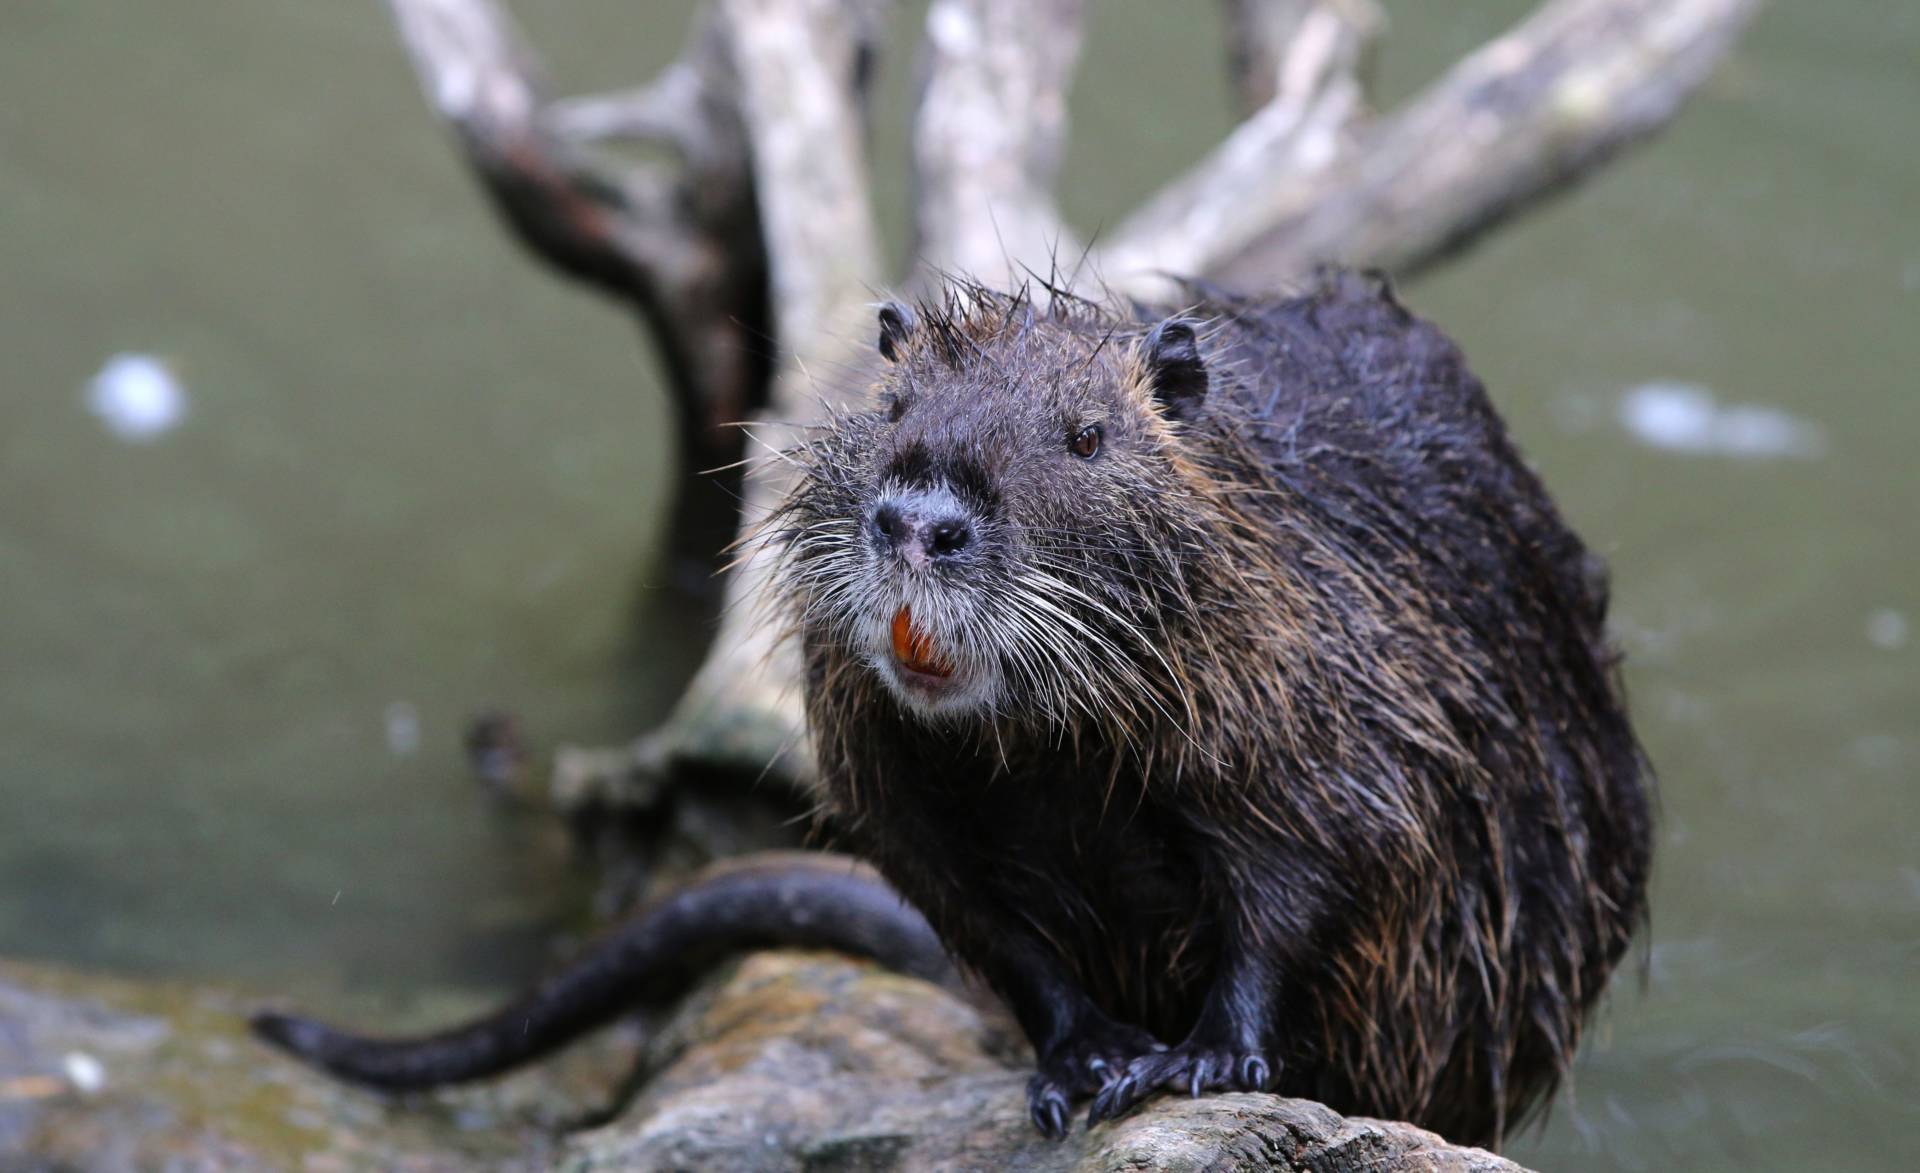 A nutria sits on a log on June 9, 2018. Although California’s Department of Food and Agriculture eradicated them in the 1970s, a few nutria were spotted in Merced County last year. Yann Schreiber/AFP/Getty Image